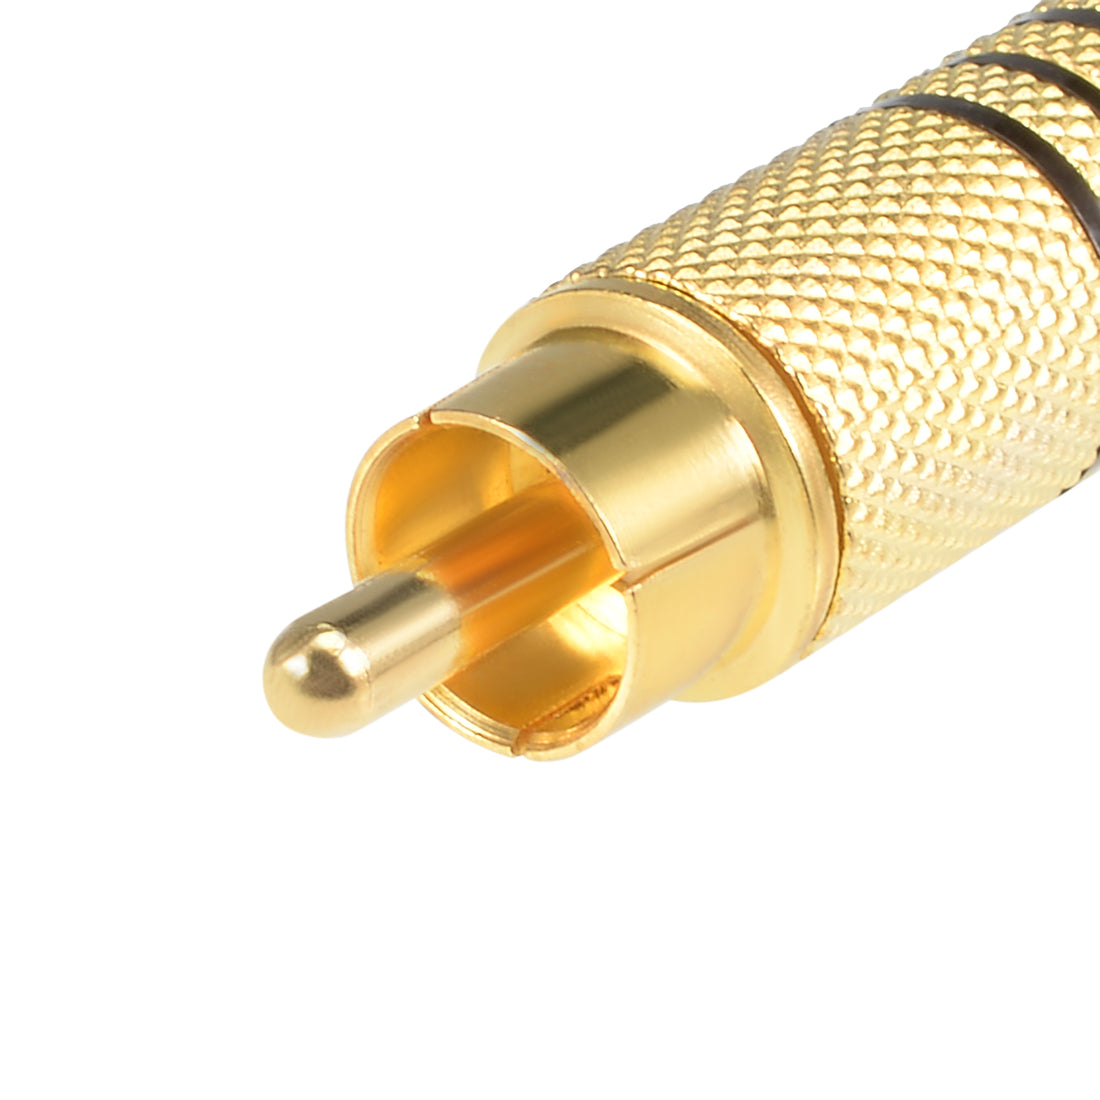 uxcell Uxcell 20Pcs RCA Male Connector AV Jack Audio Video w Spring Adapter Solderless Gold Tone